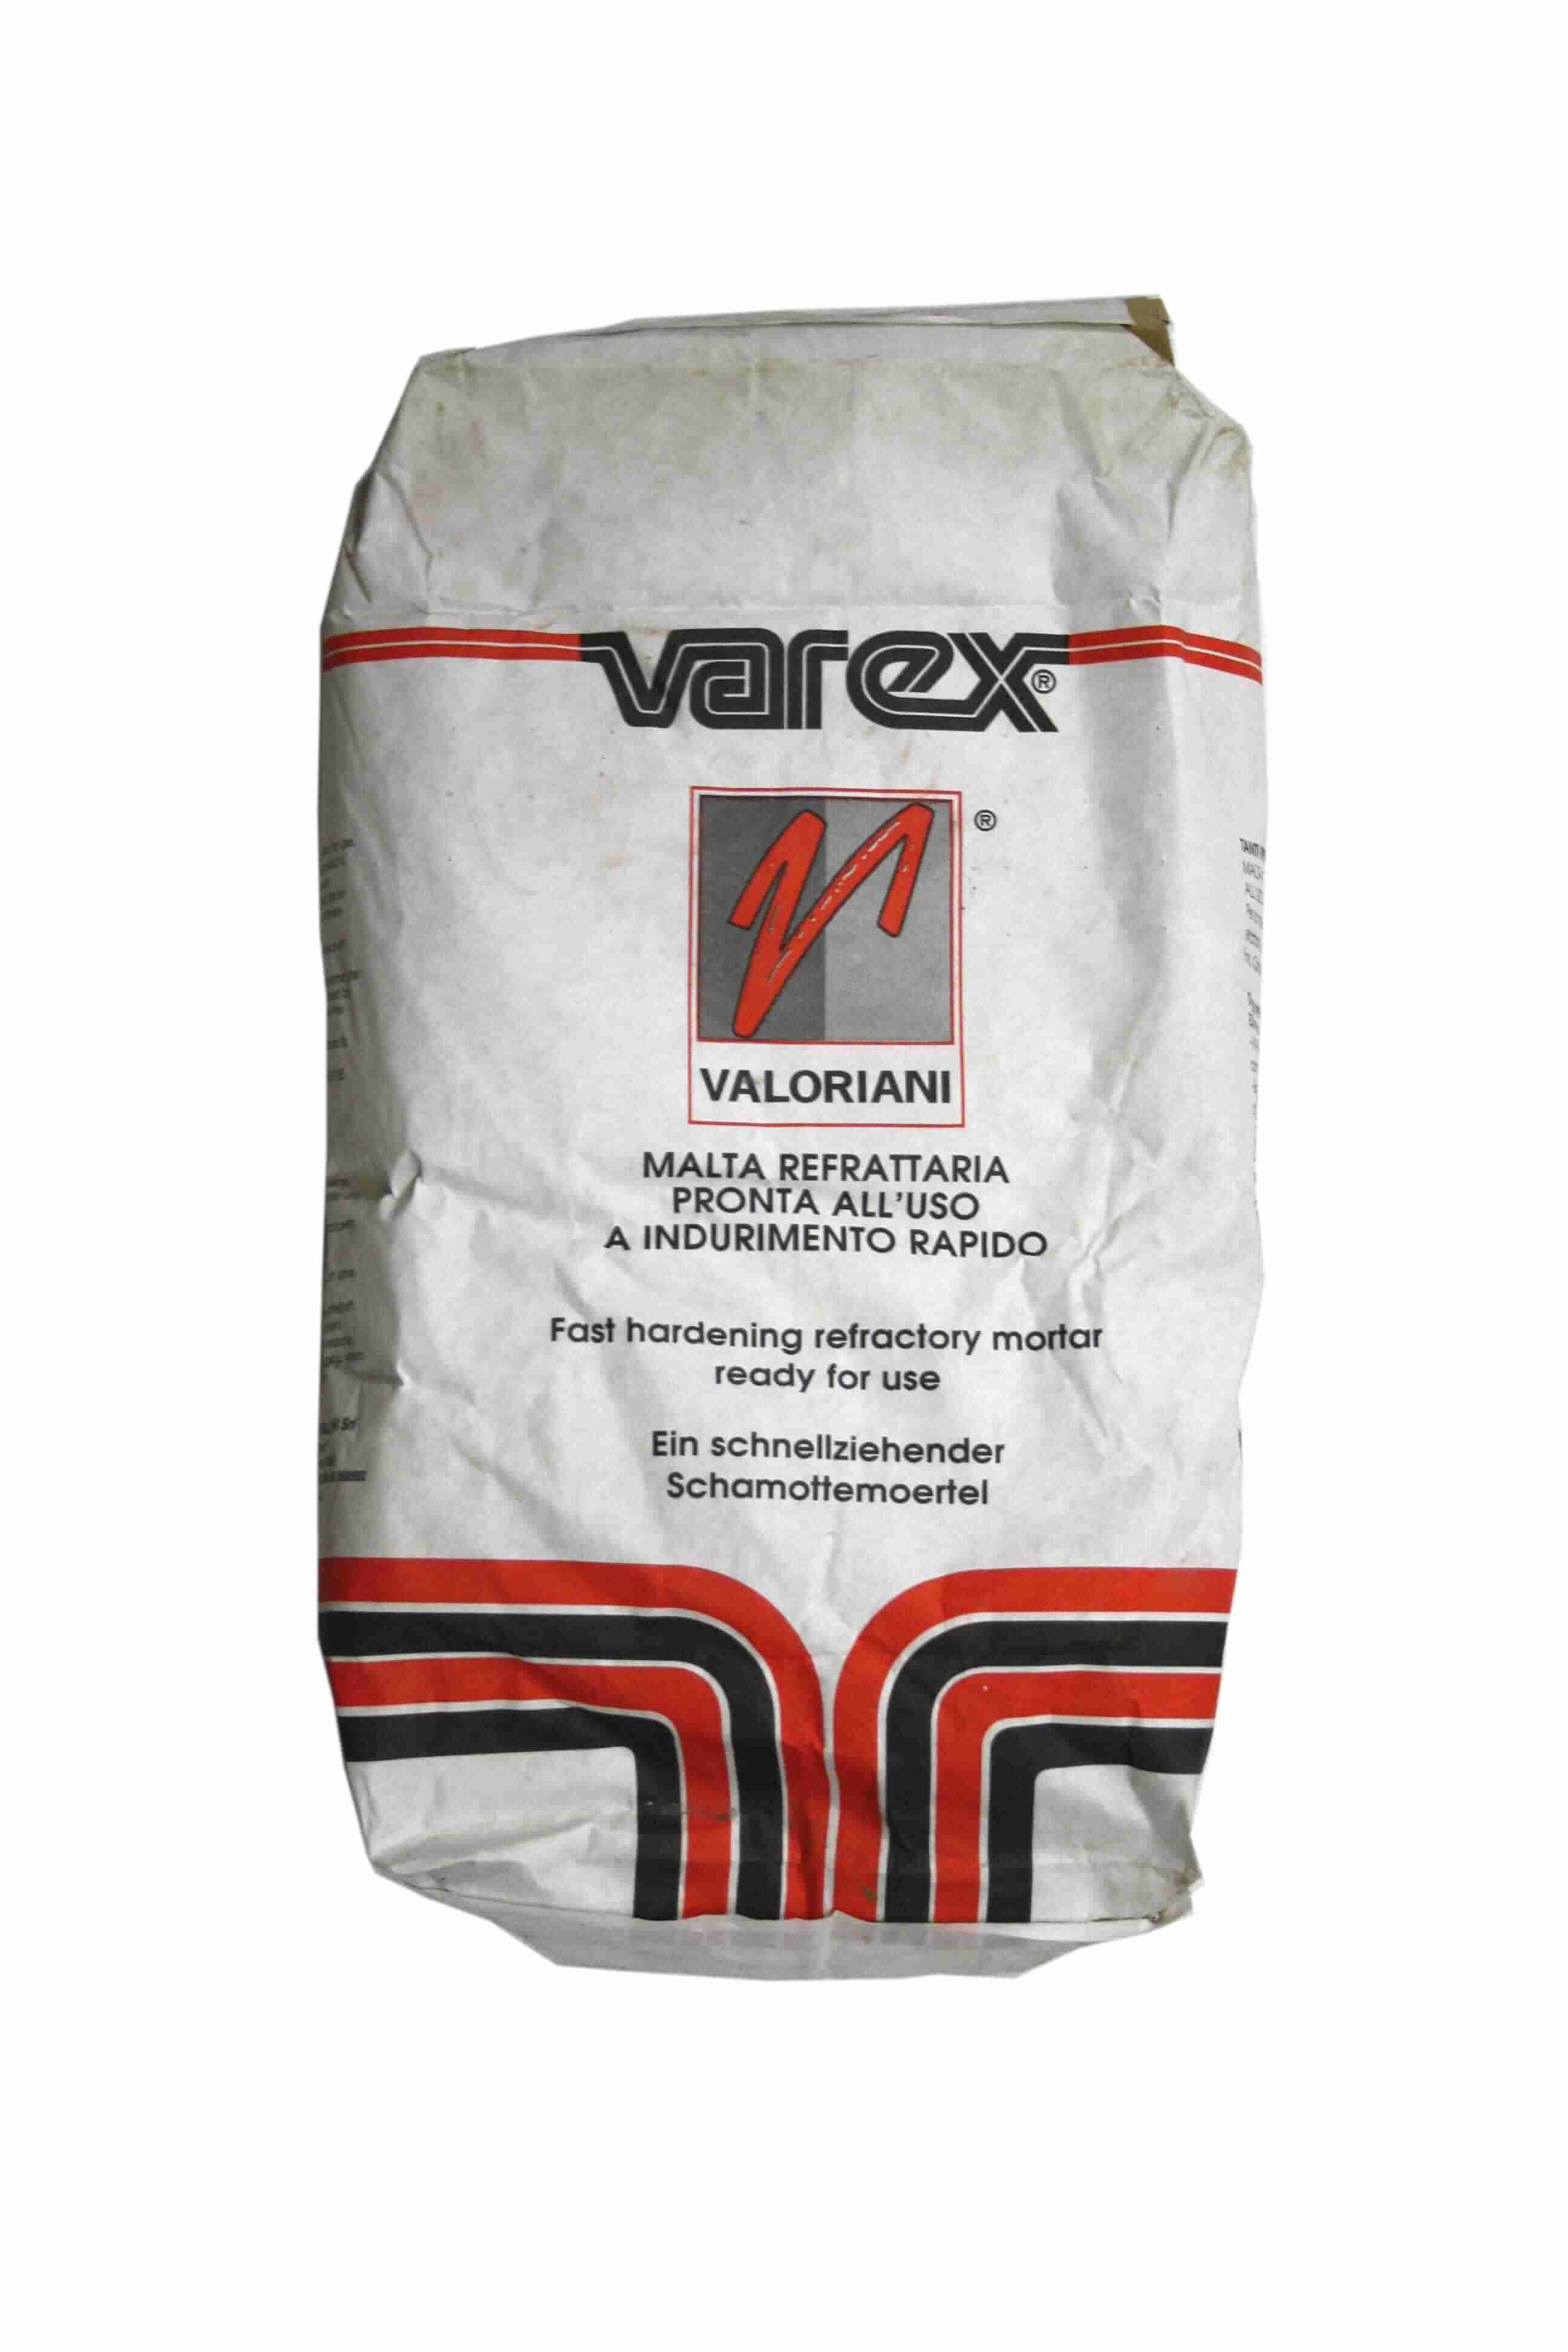 Fireclay mortar Valoriani for wood oven Varex